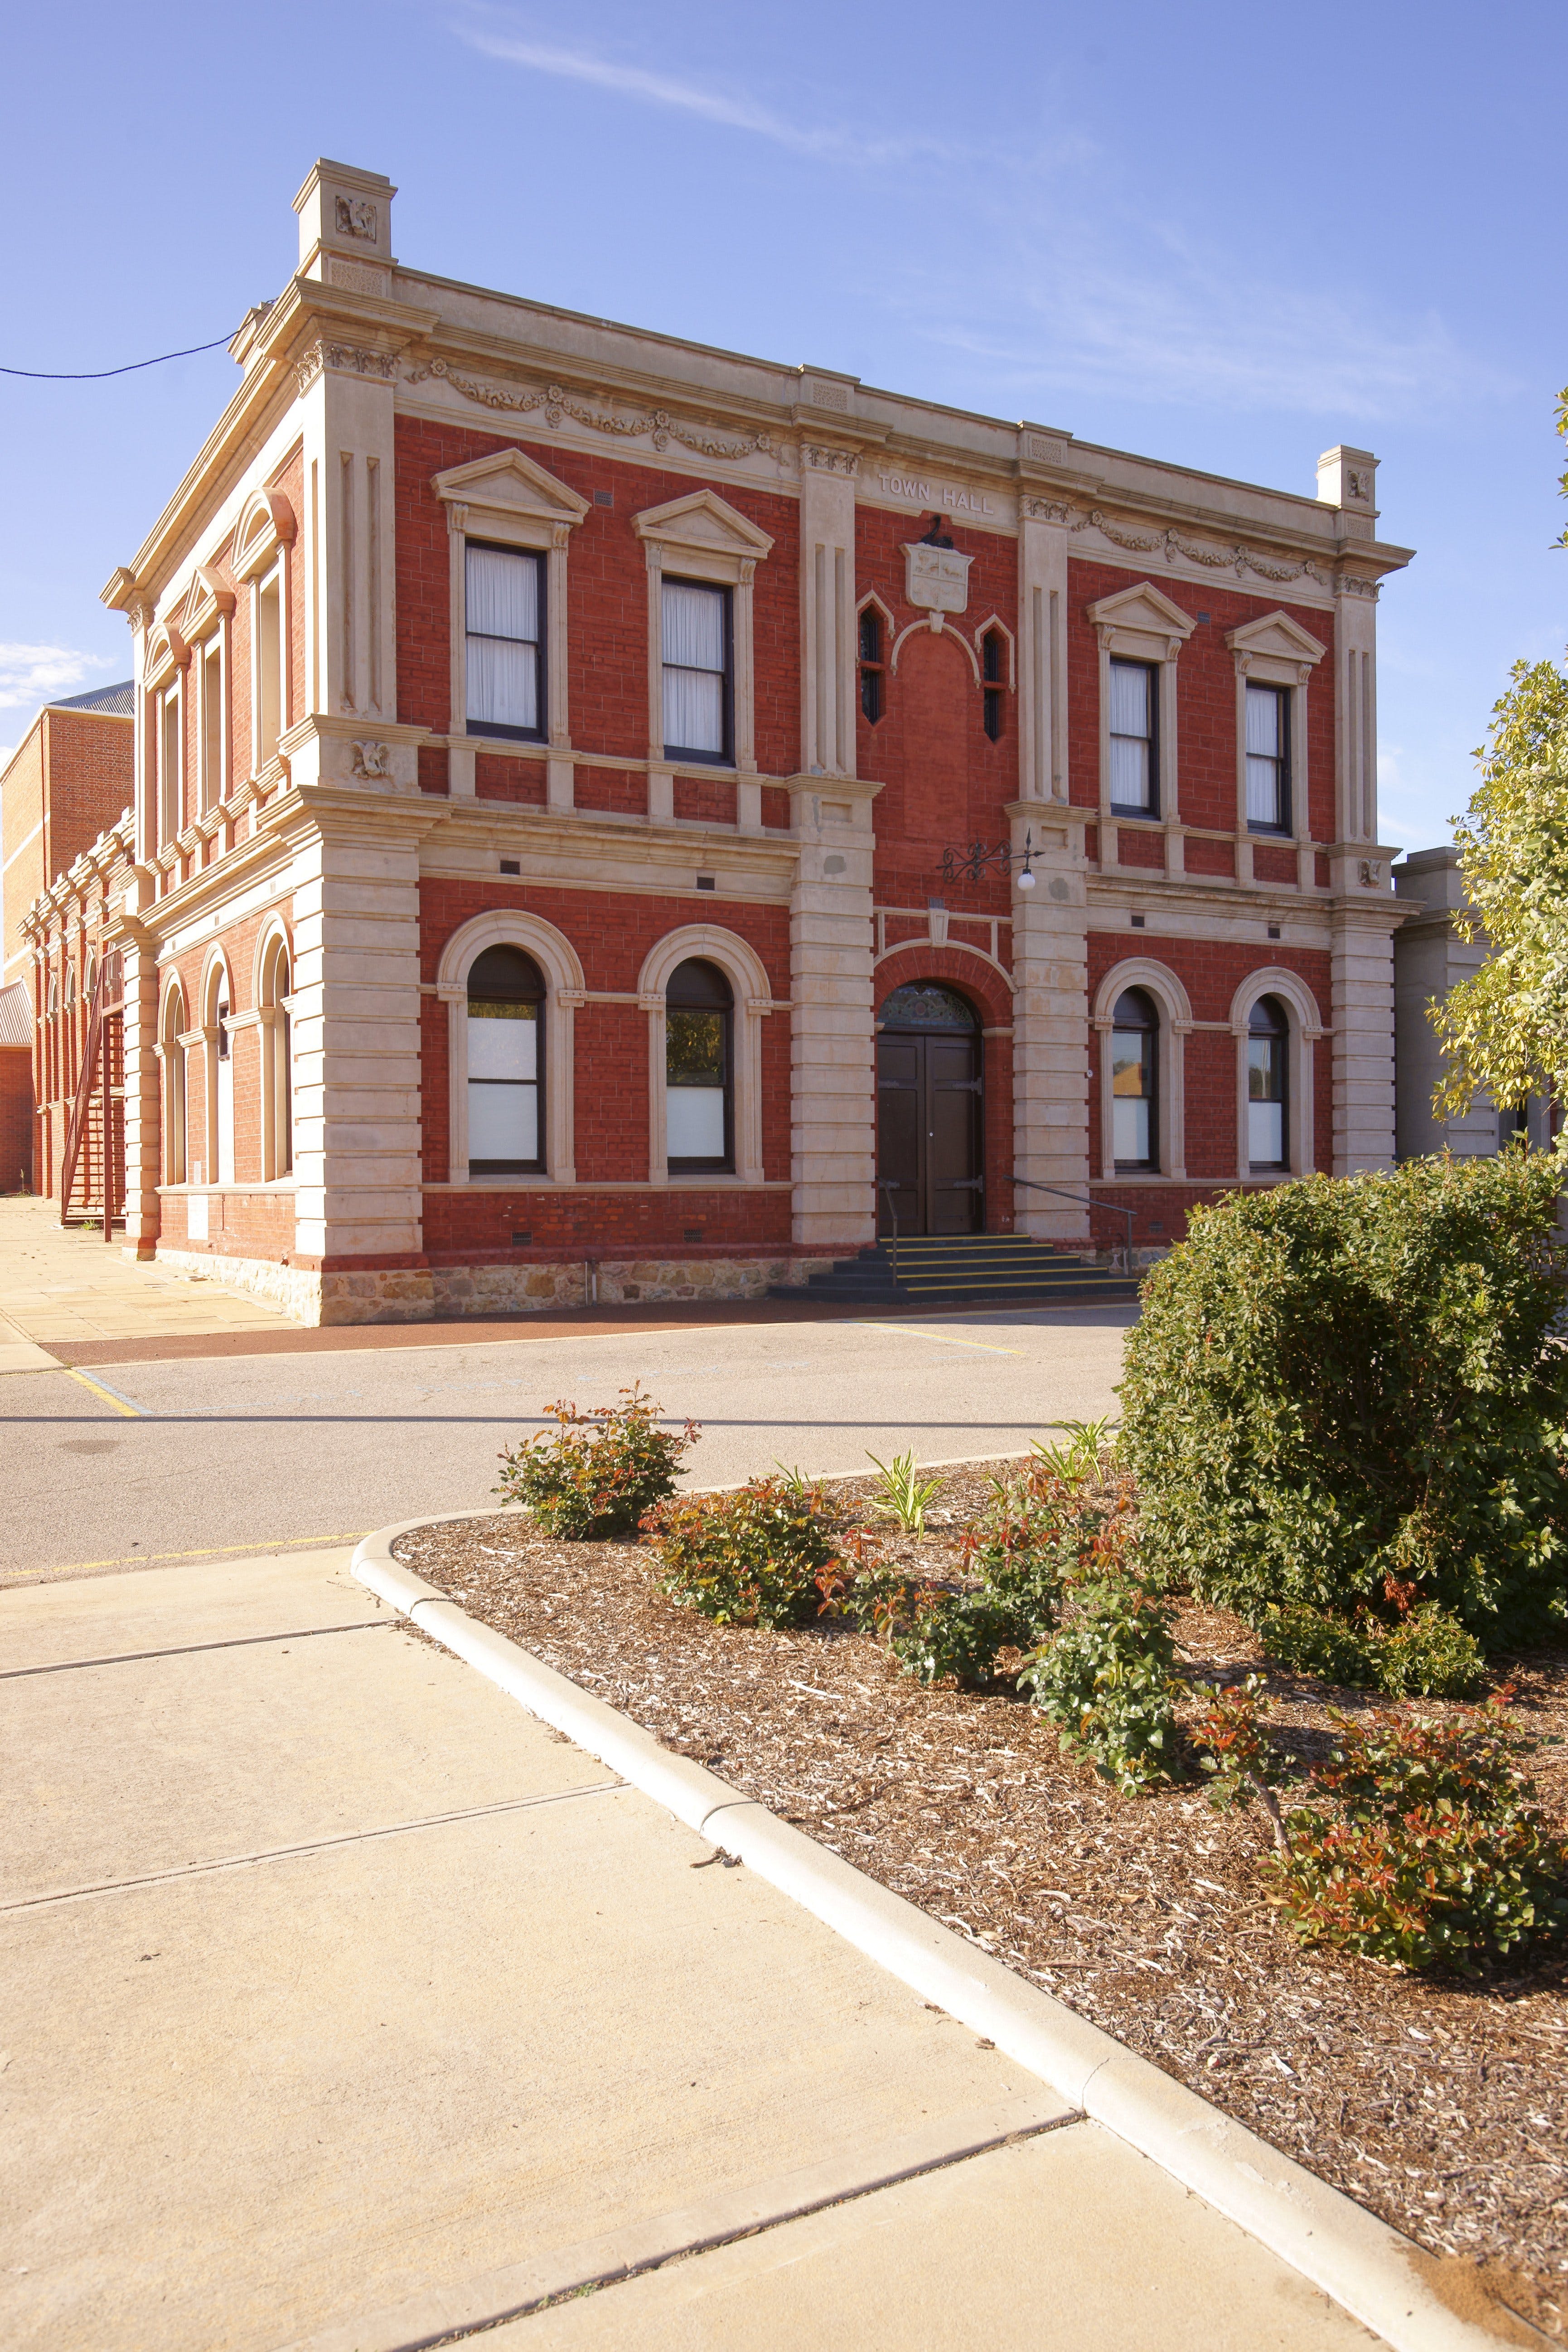 Northam Town Hall - Attractions